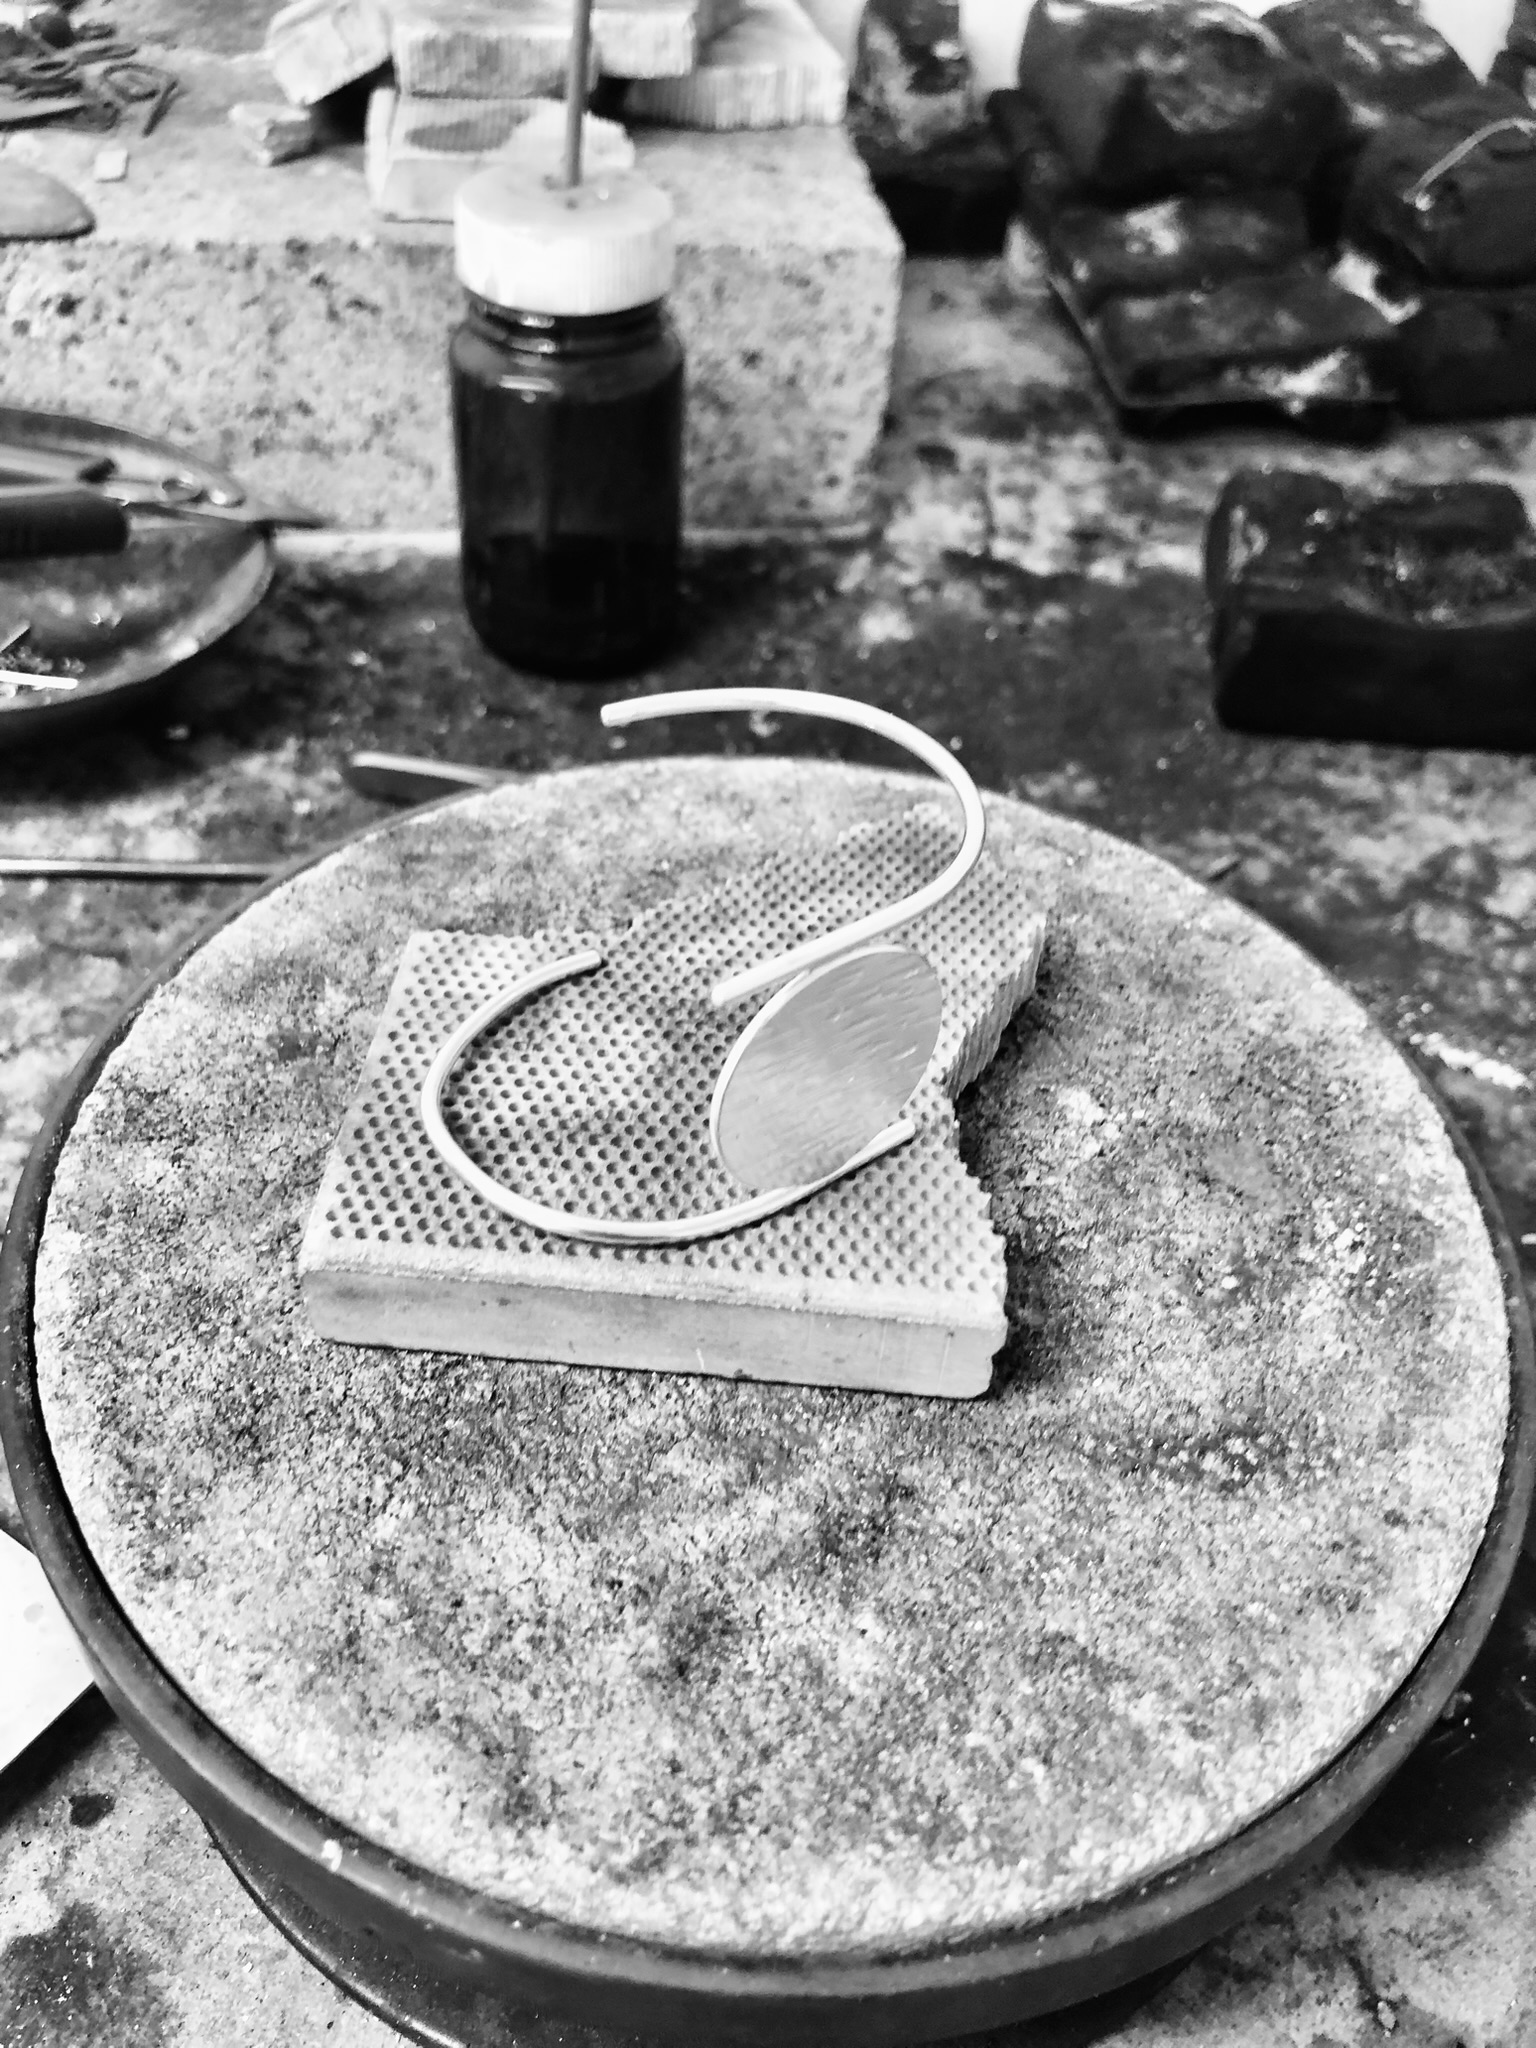 A silverbracelet in the making on a silversmith's bench